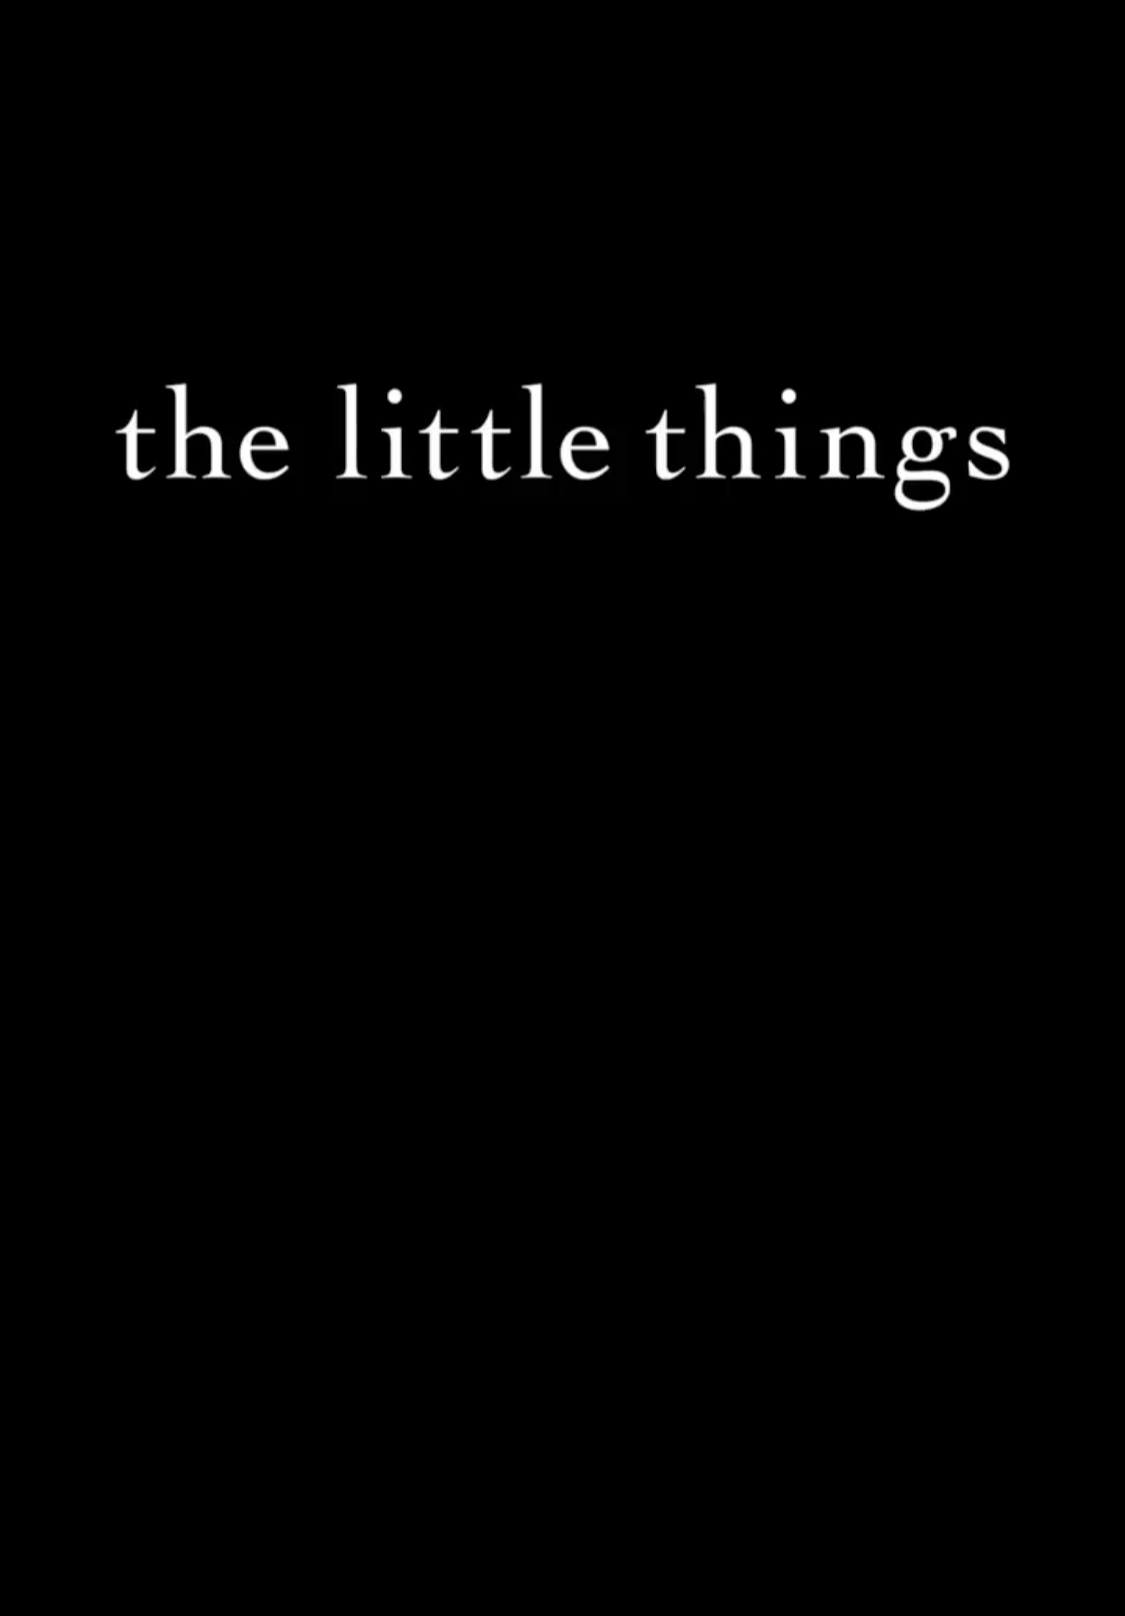 The Little Things Poster 2021 Wallpapers